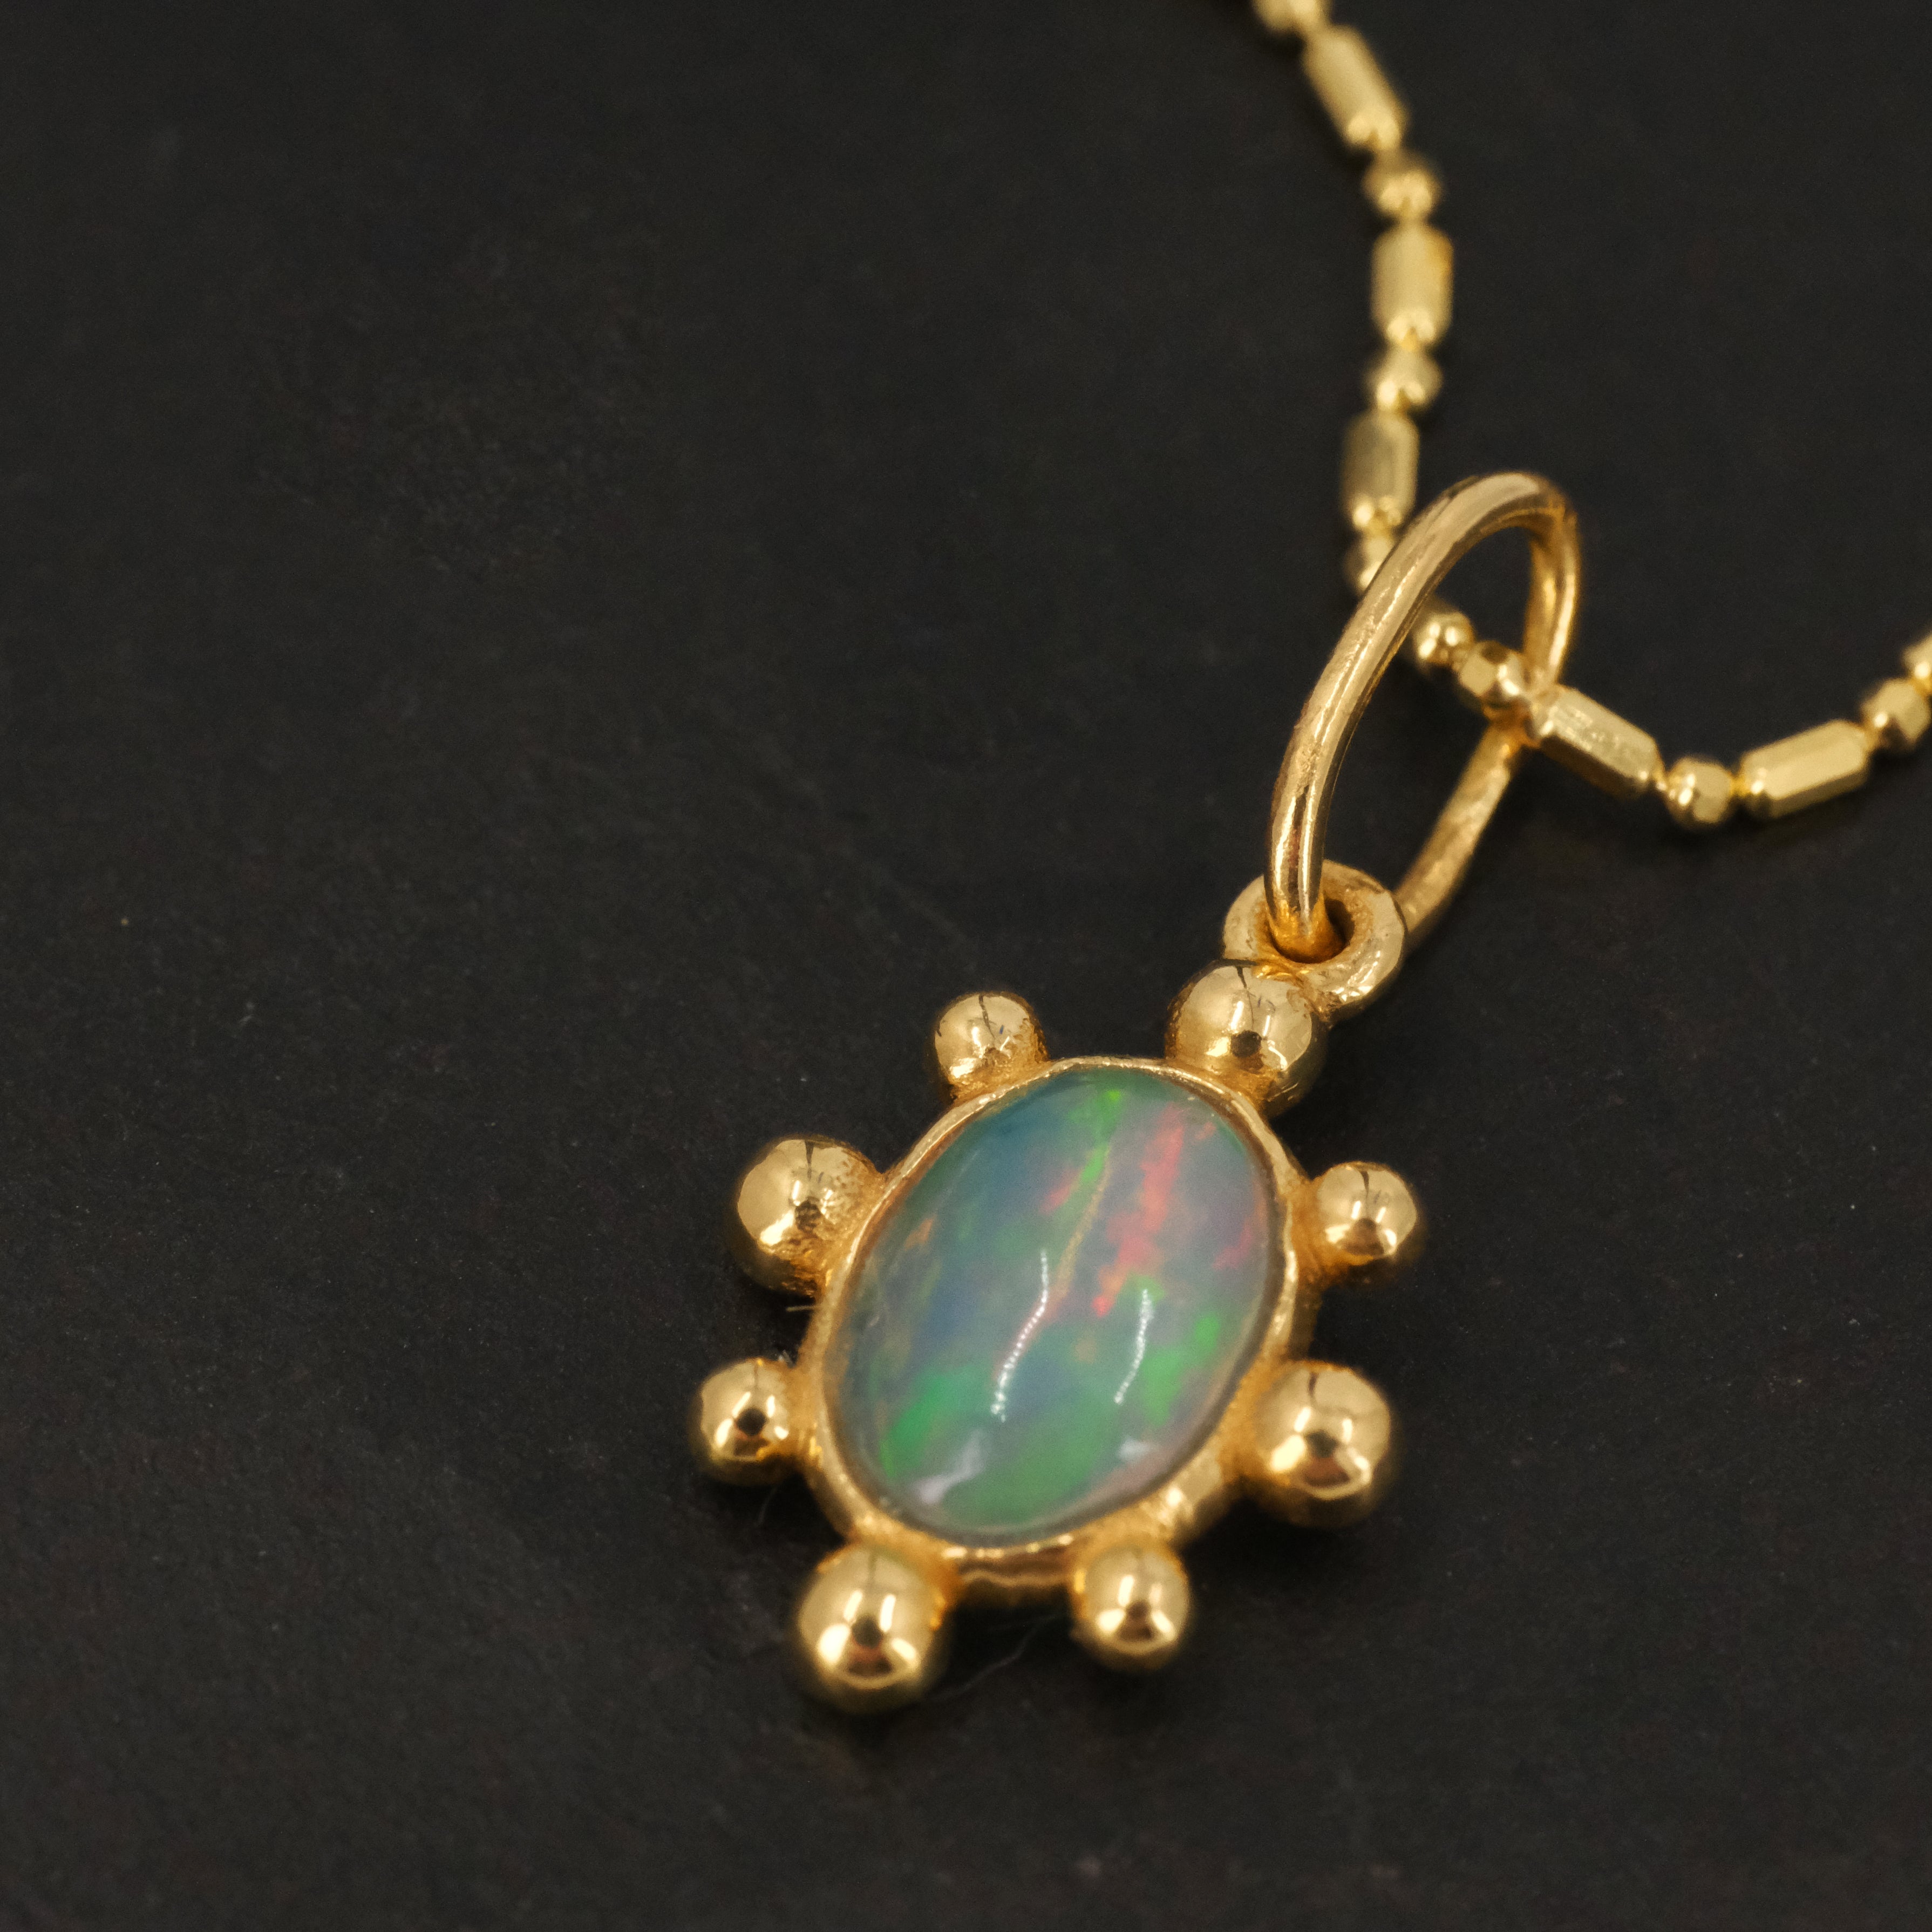 14k + Opal Sol Necklace - One of a Kind